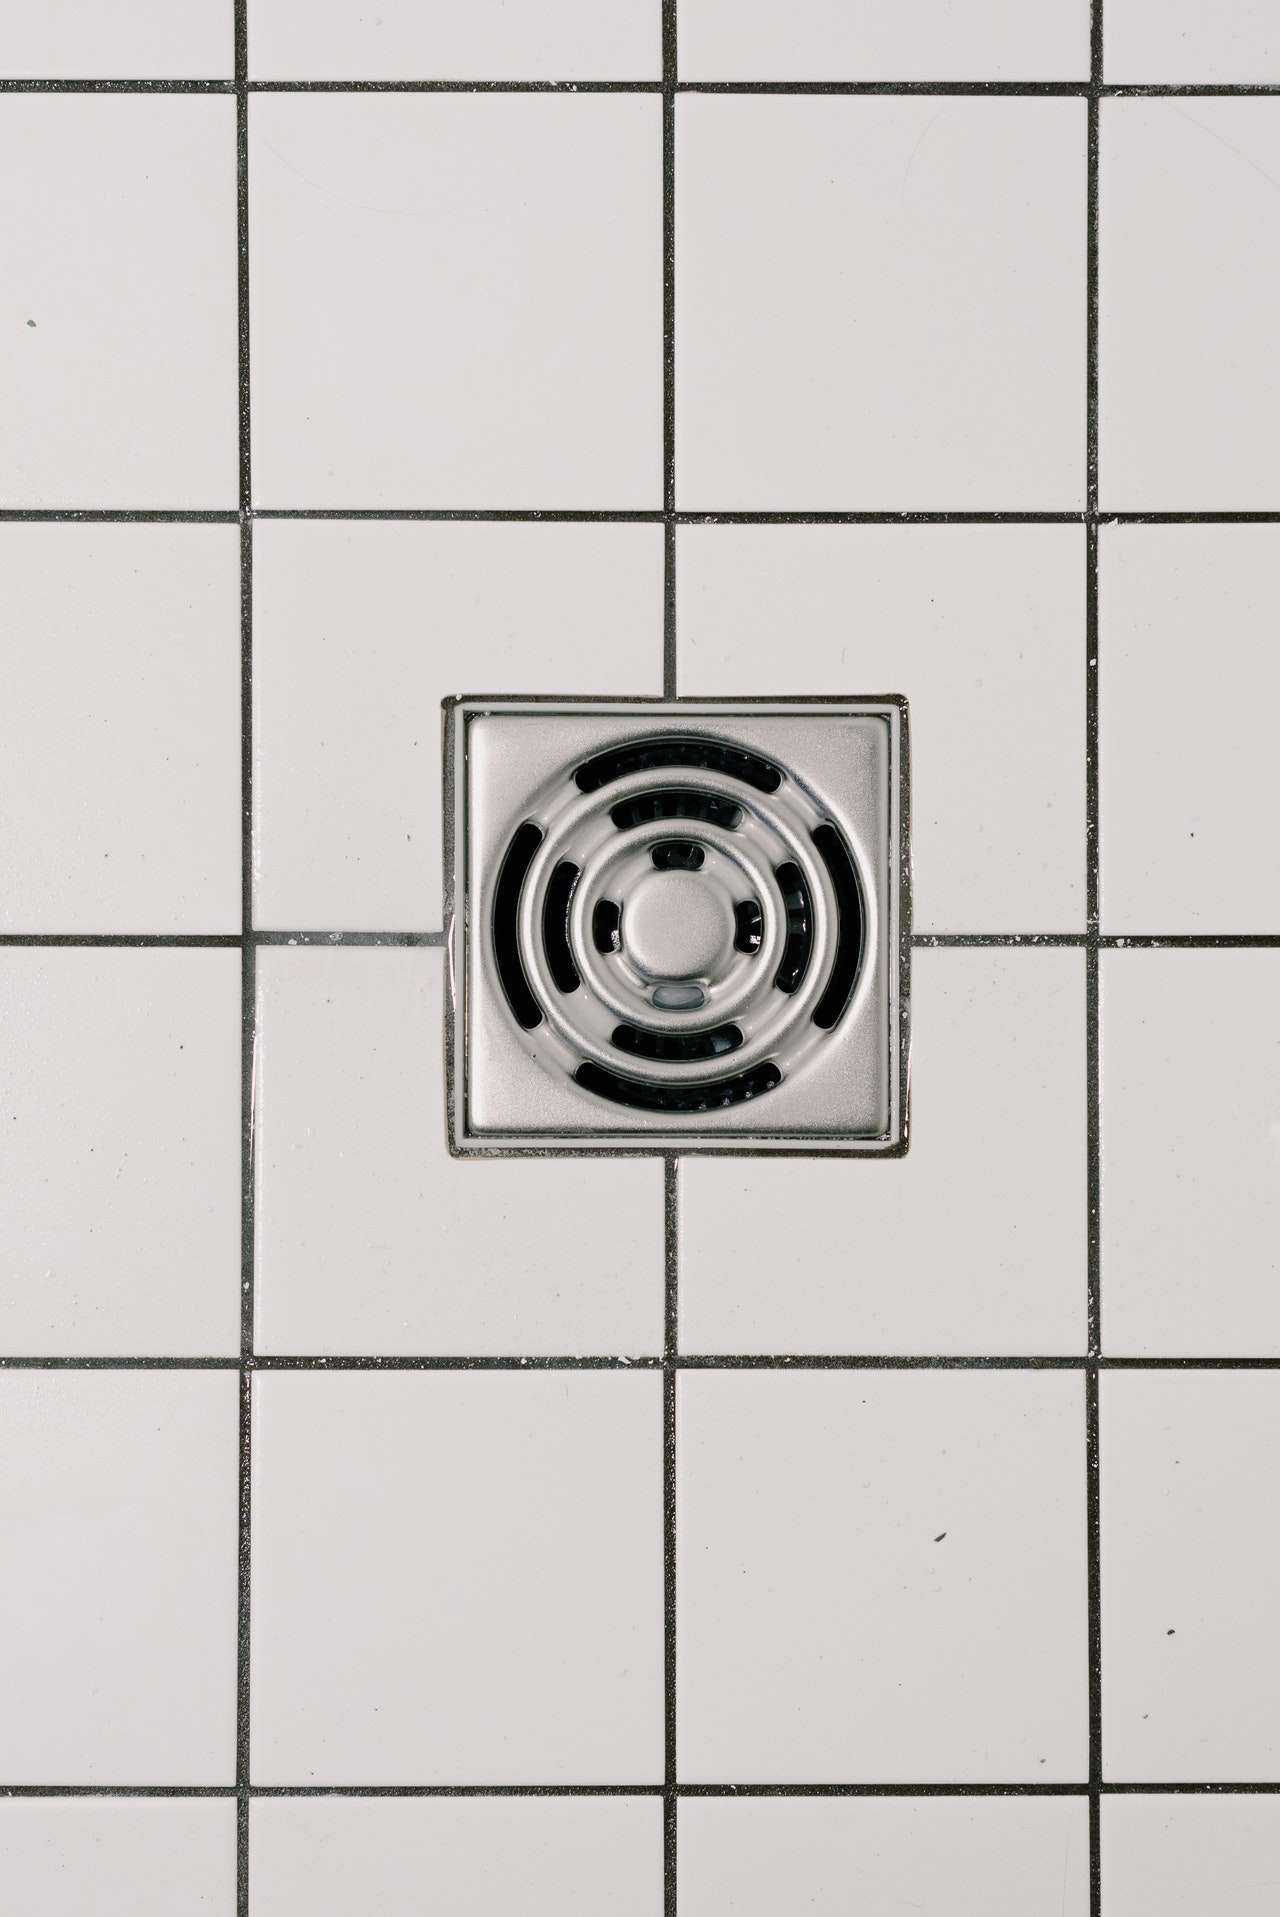 What Is Clogging Your Drain and How Can You Fix It?